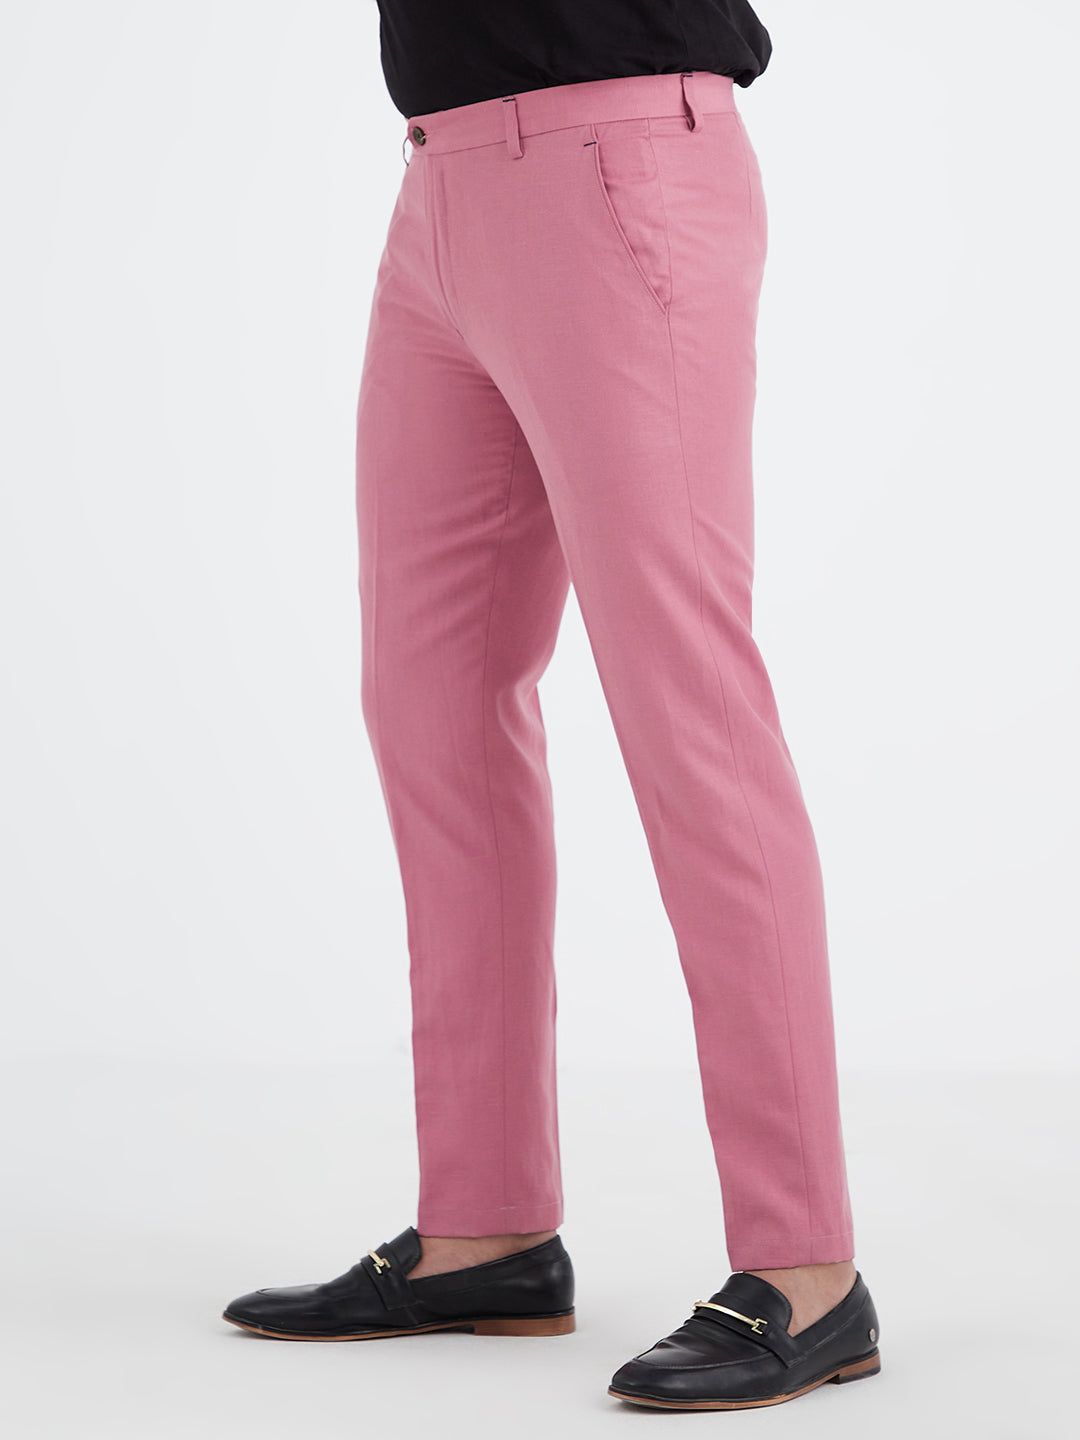 In Rouge Trouser